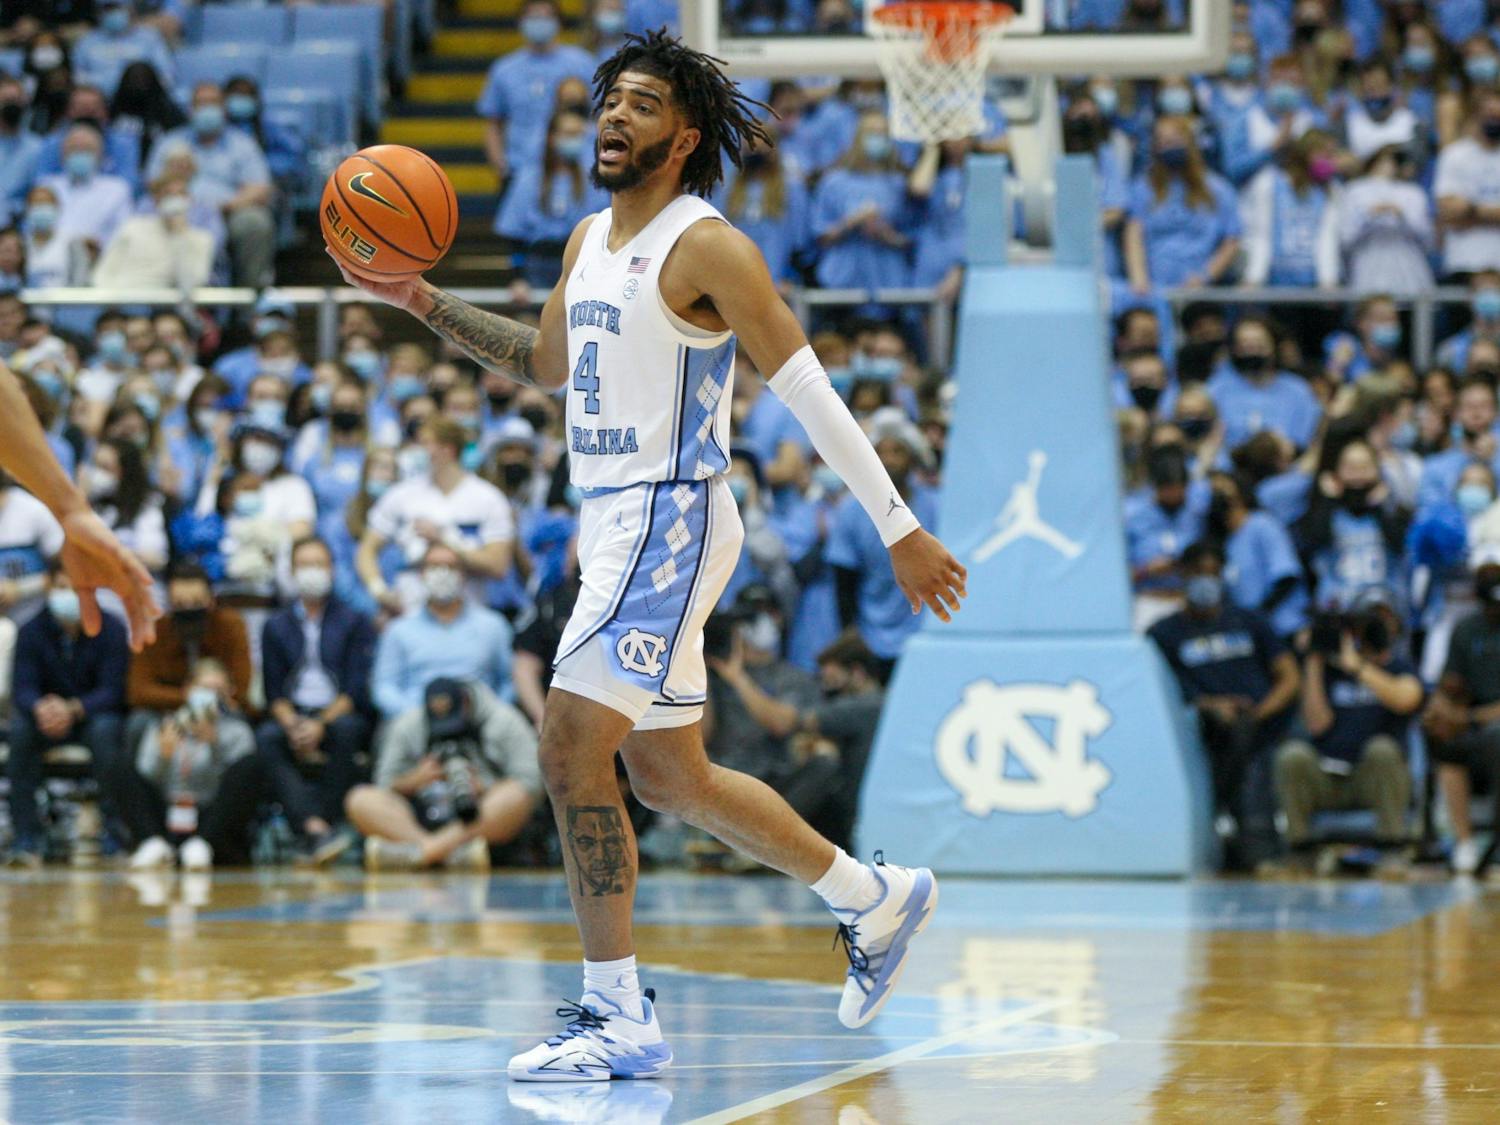 Sophomore guard RJ Davis (4) dribbles the ball at the game against Pittsburgh on Feb. 16, 2022 at the Smith Center. UNC lost 76-67.